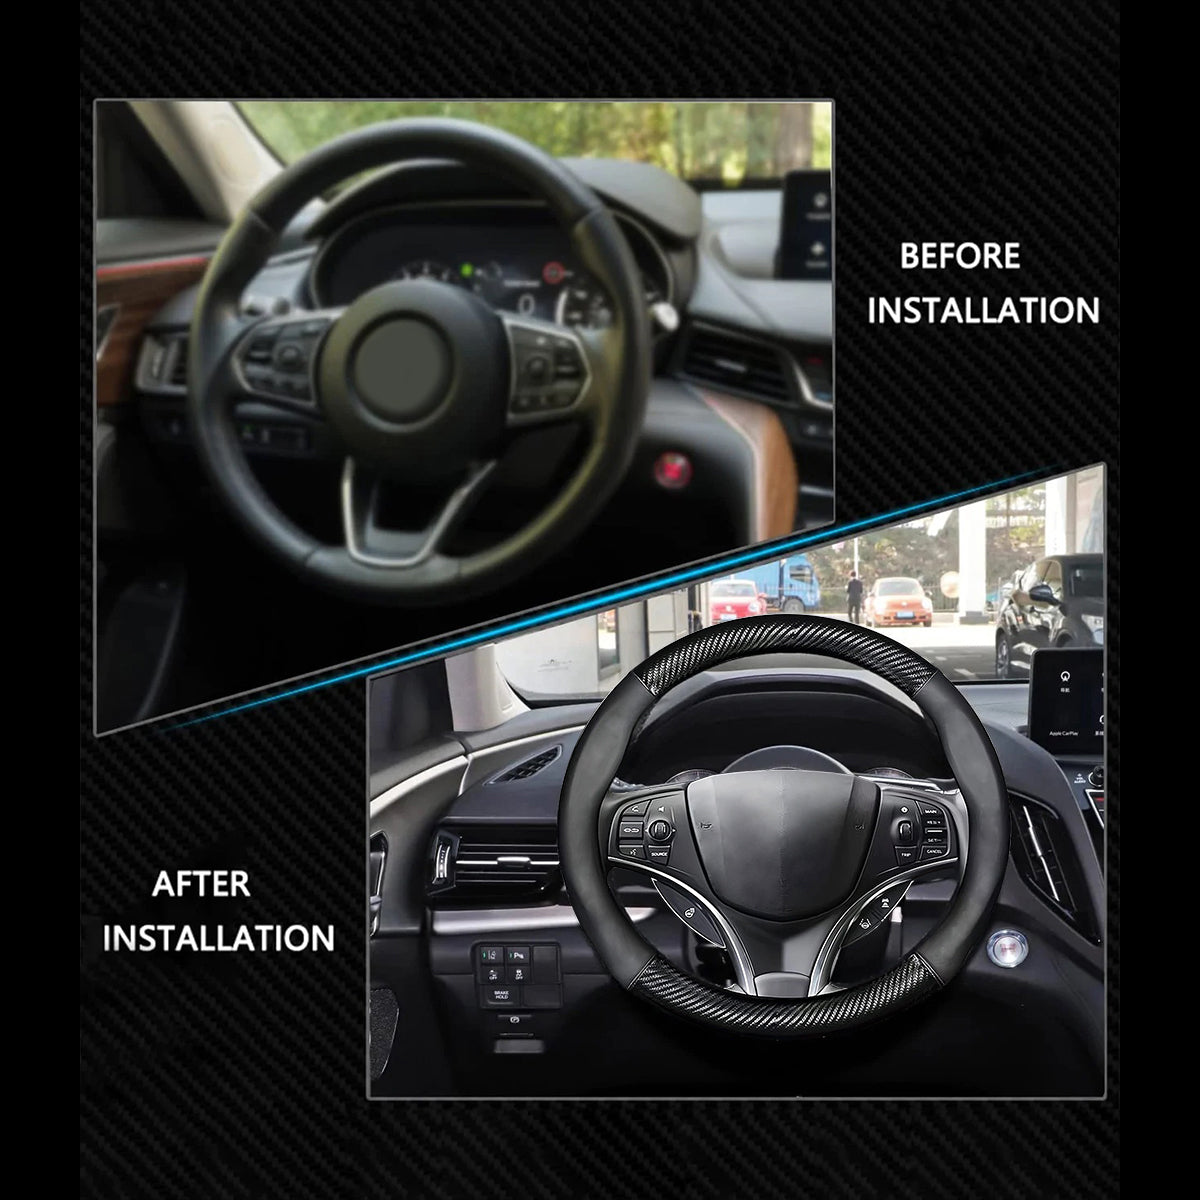 Car Steering Wheel Cover, Custom For Your Cars, Leather Nonslip 3D Carbon Fiber Texture Sport Style Wheel Cover for Women, Interior Modification for All Car Accessories HA18992 - Delicate Leather